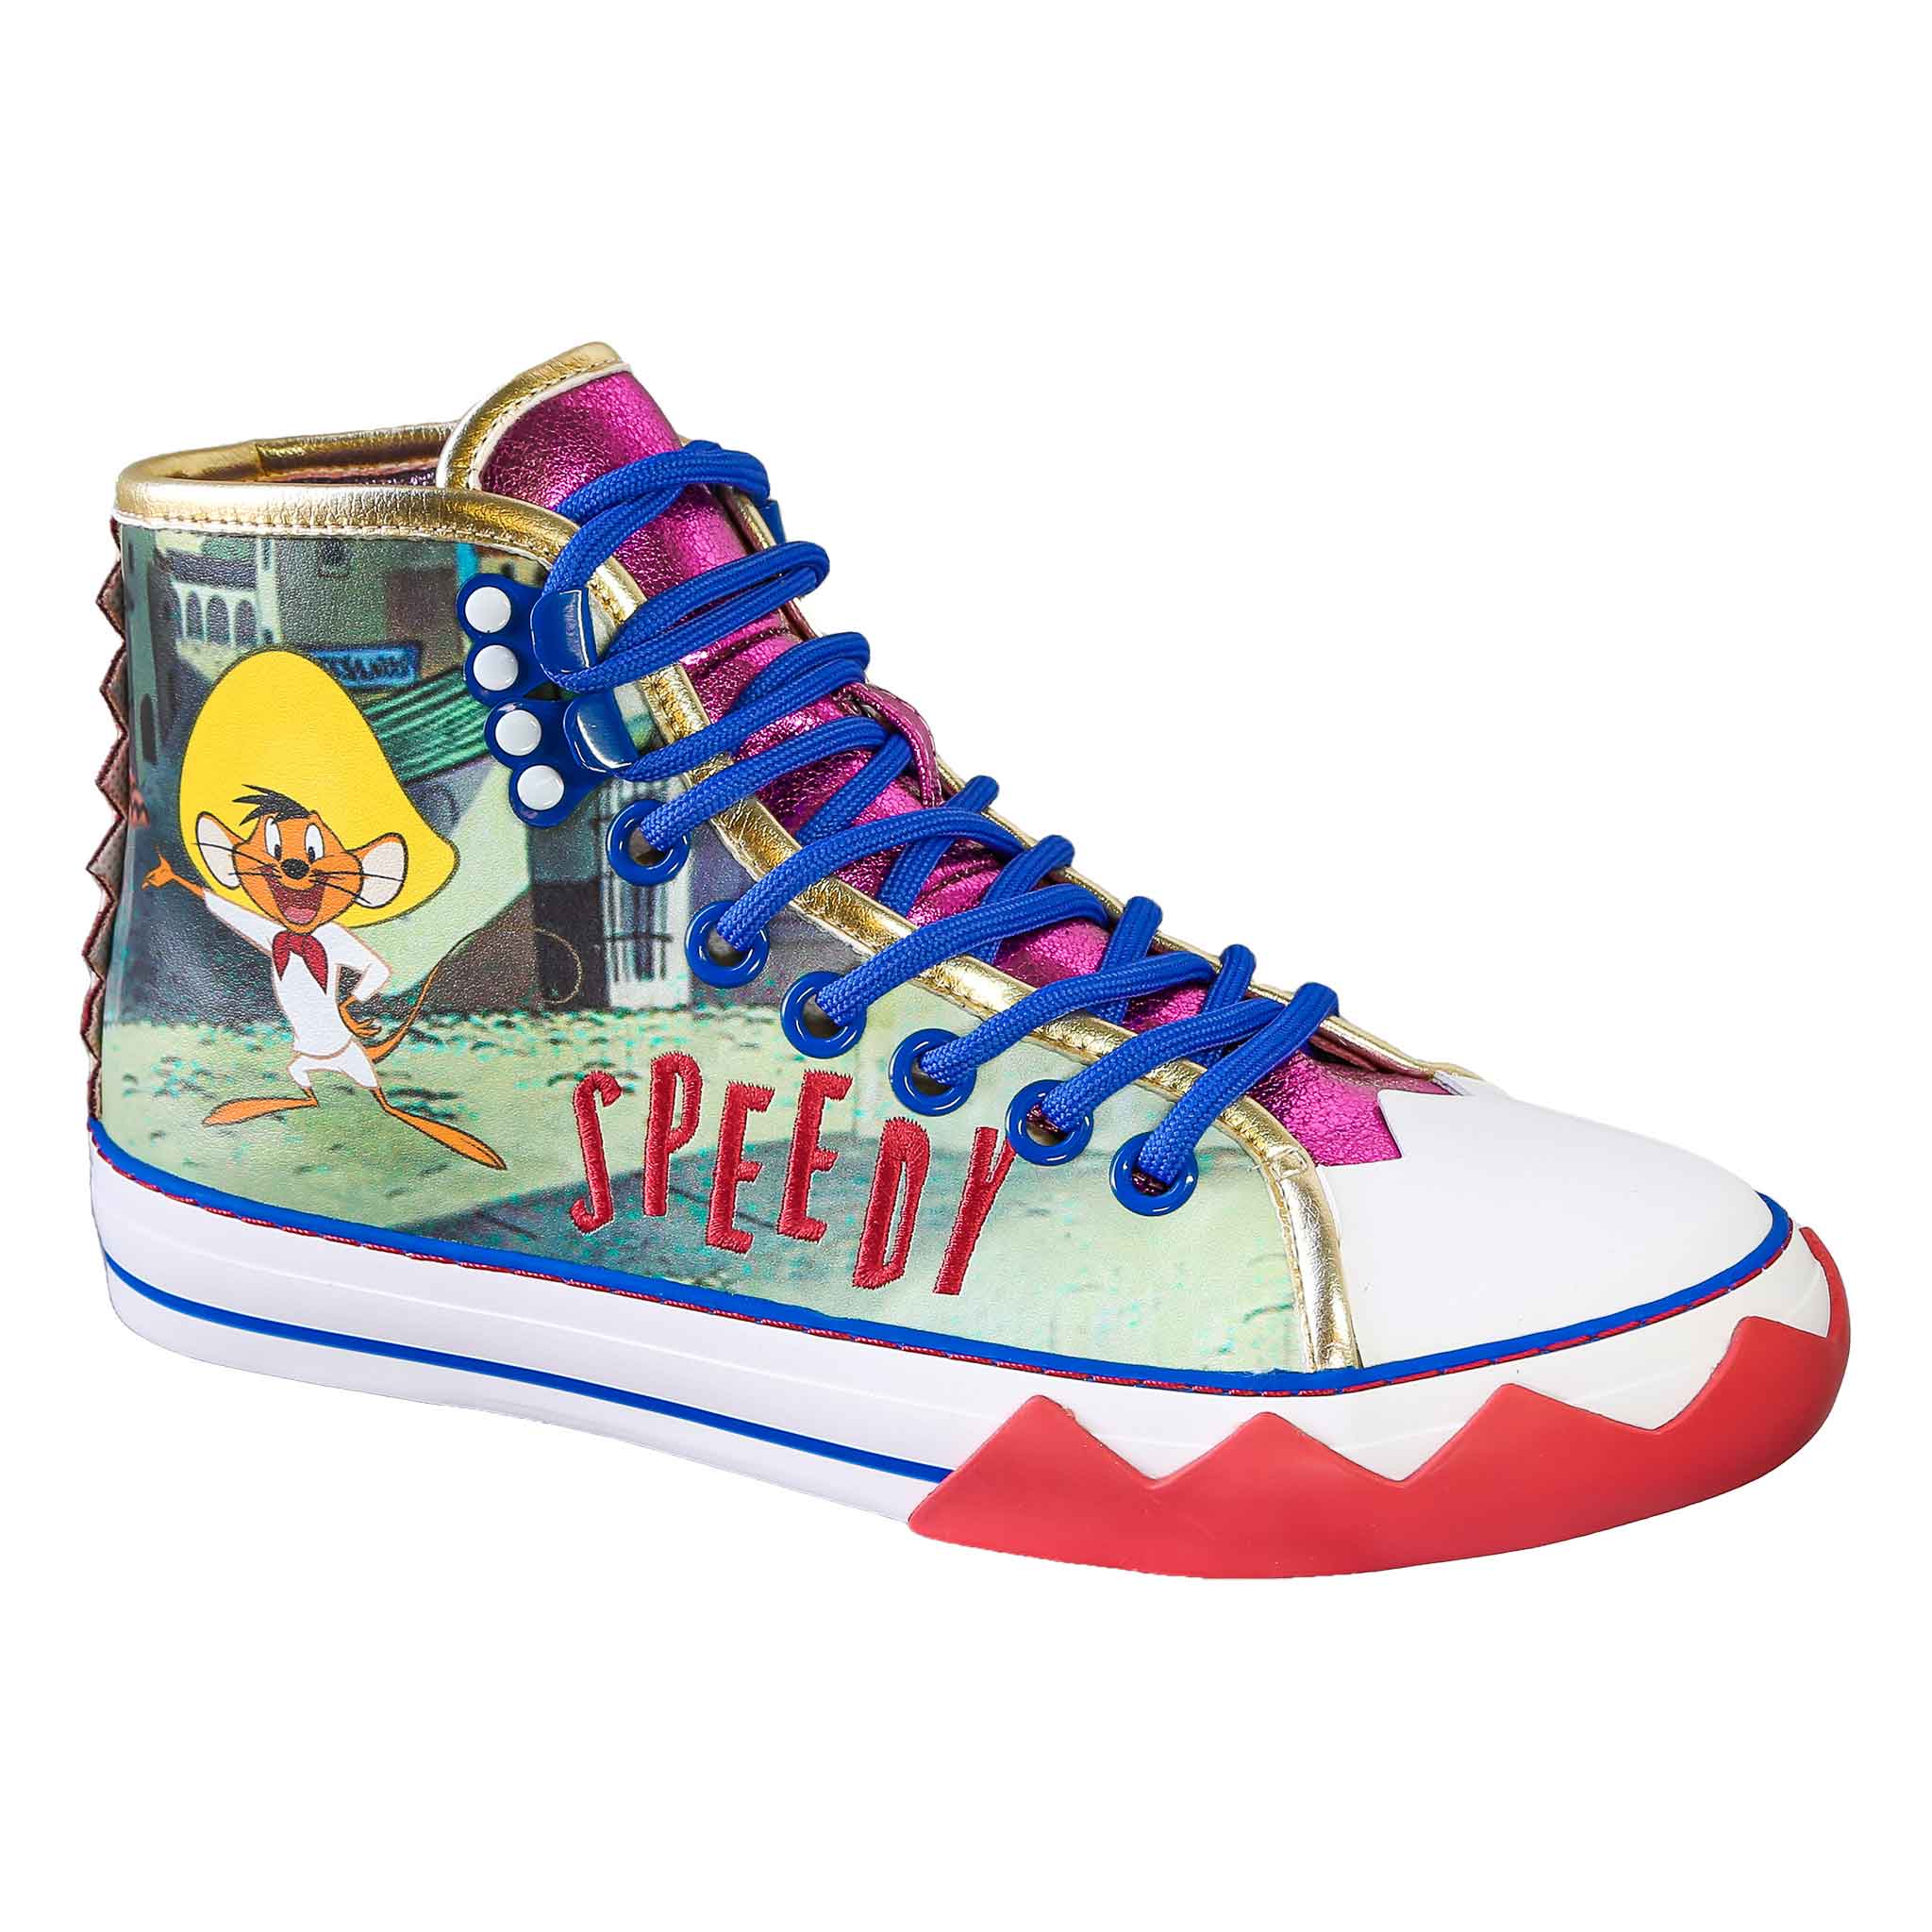 High top lace-up trainers with a scene from Looney Tunes containing Speedy Gonzalez and 'Speedy' embroidered in red  with blue laces and metallic pink tongue.